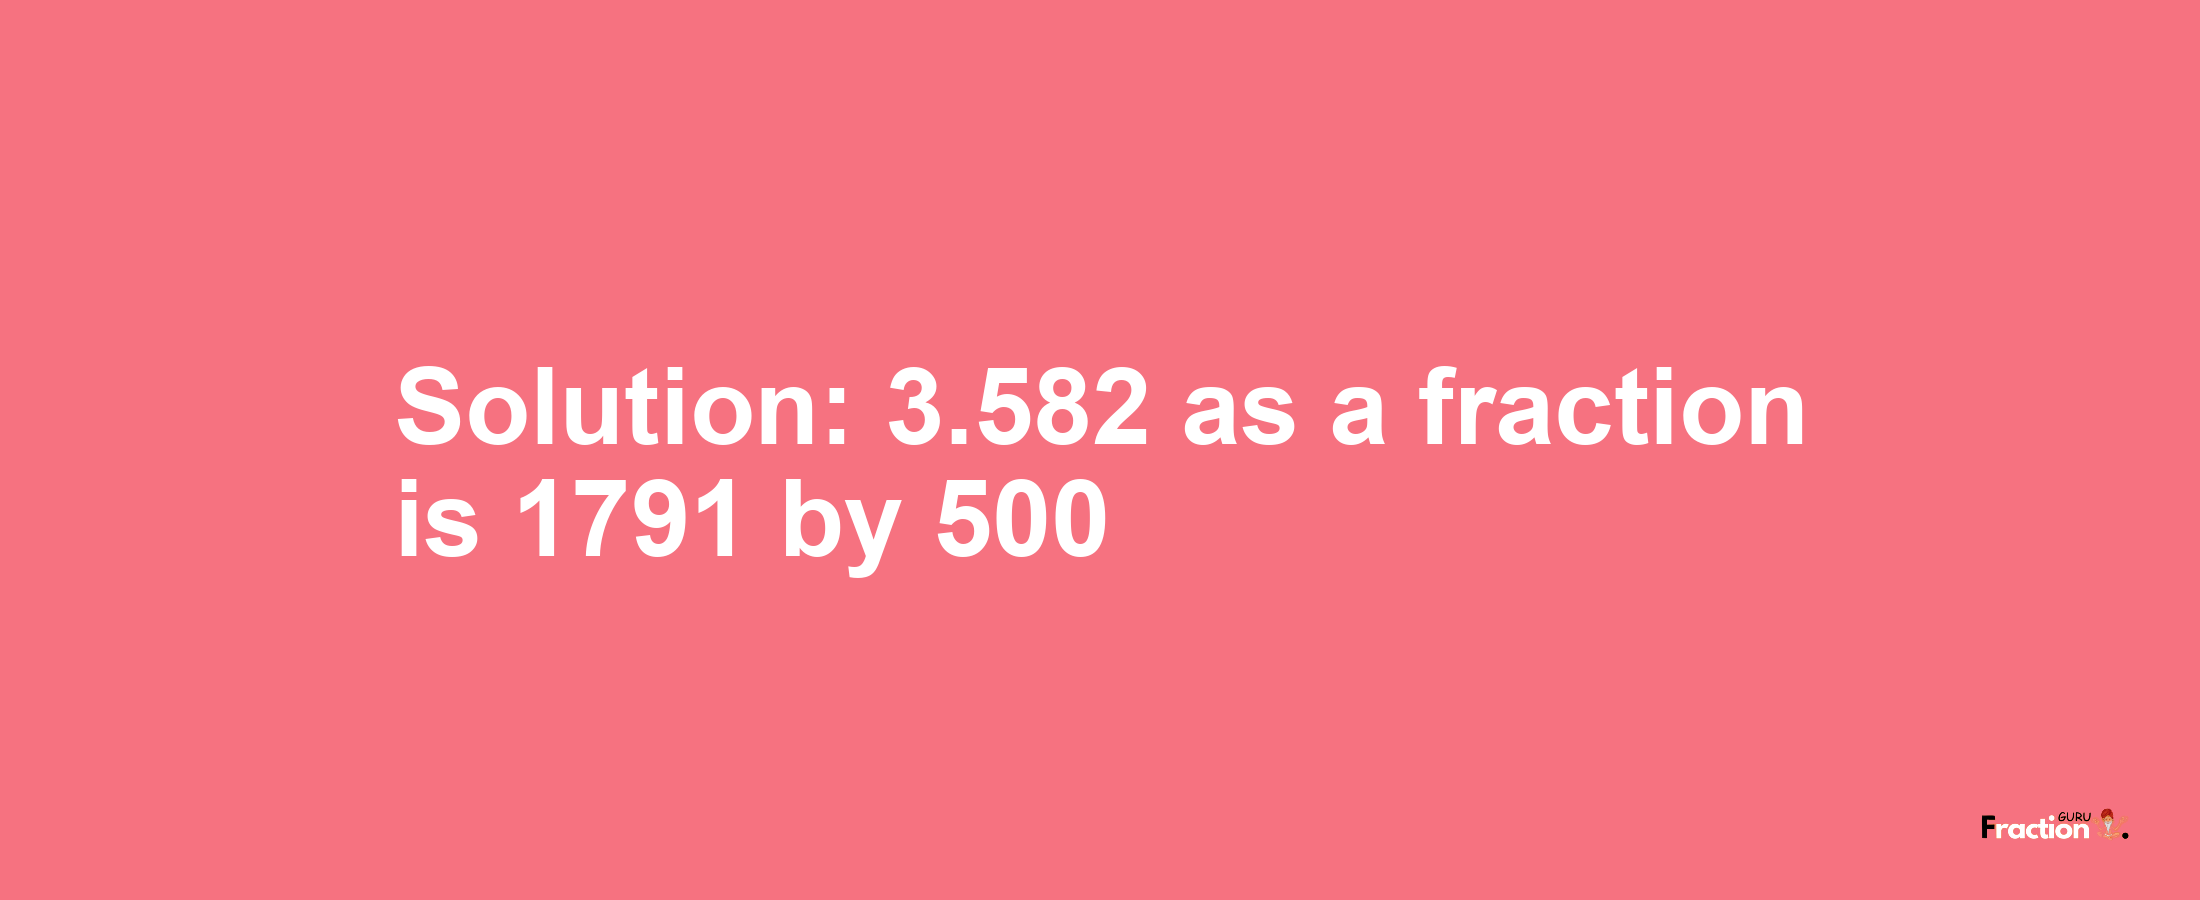 Solution:3.582 as a fraction is 1791/500